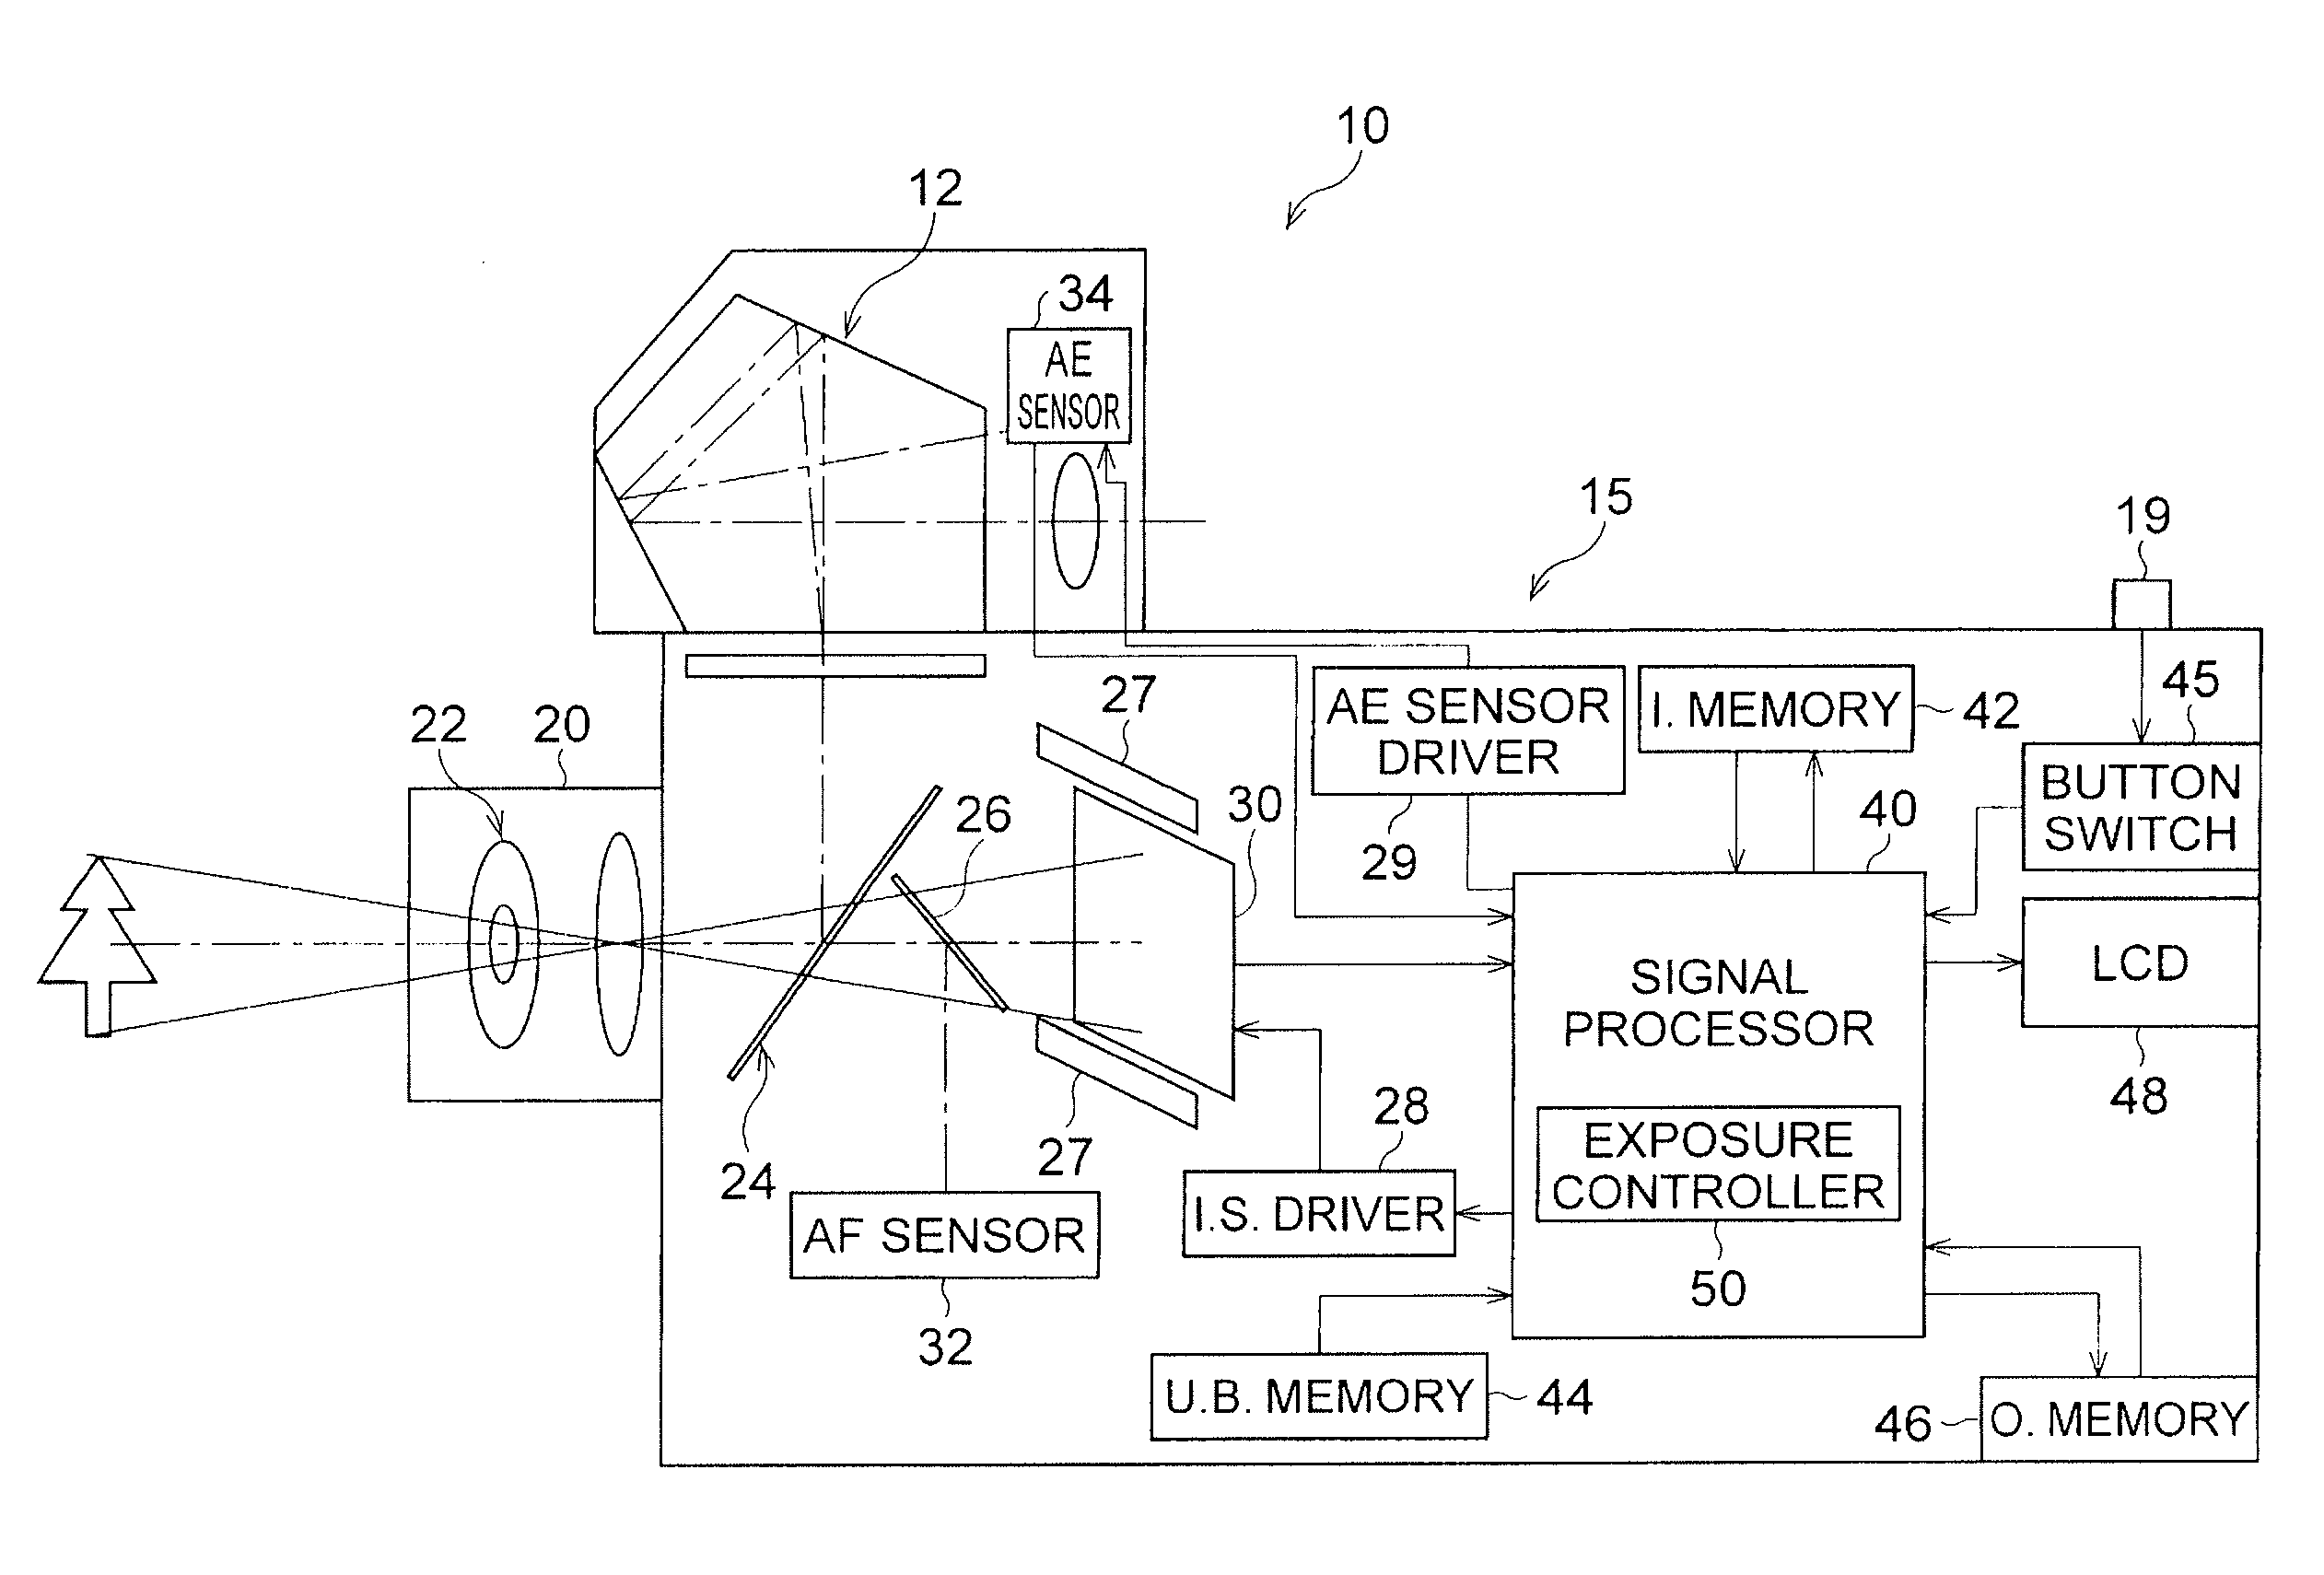 Method and apparatus for imaging an object